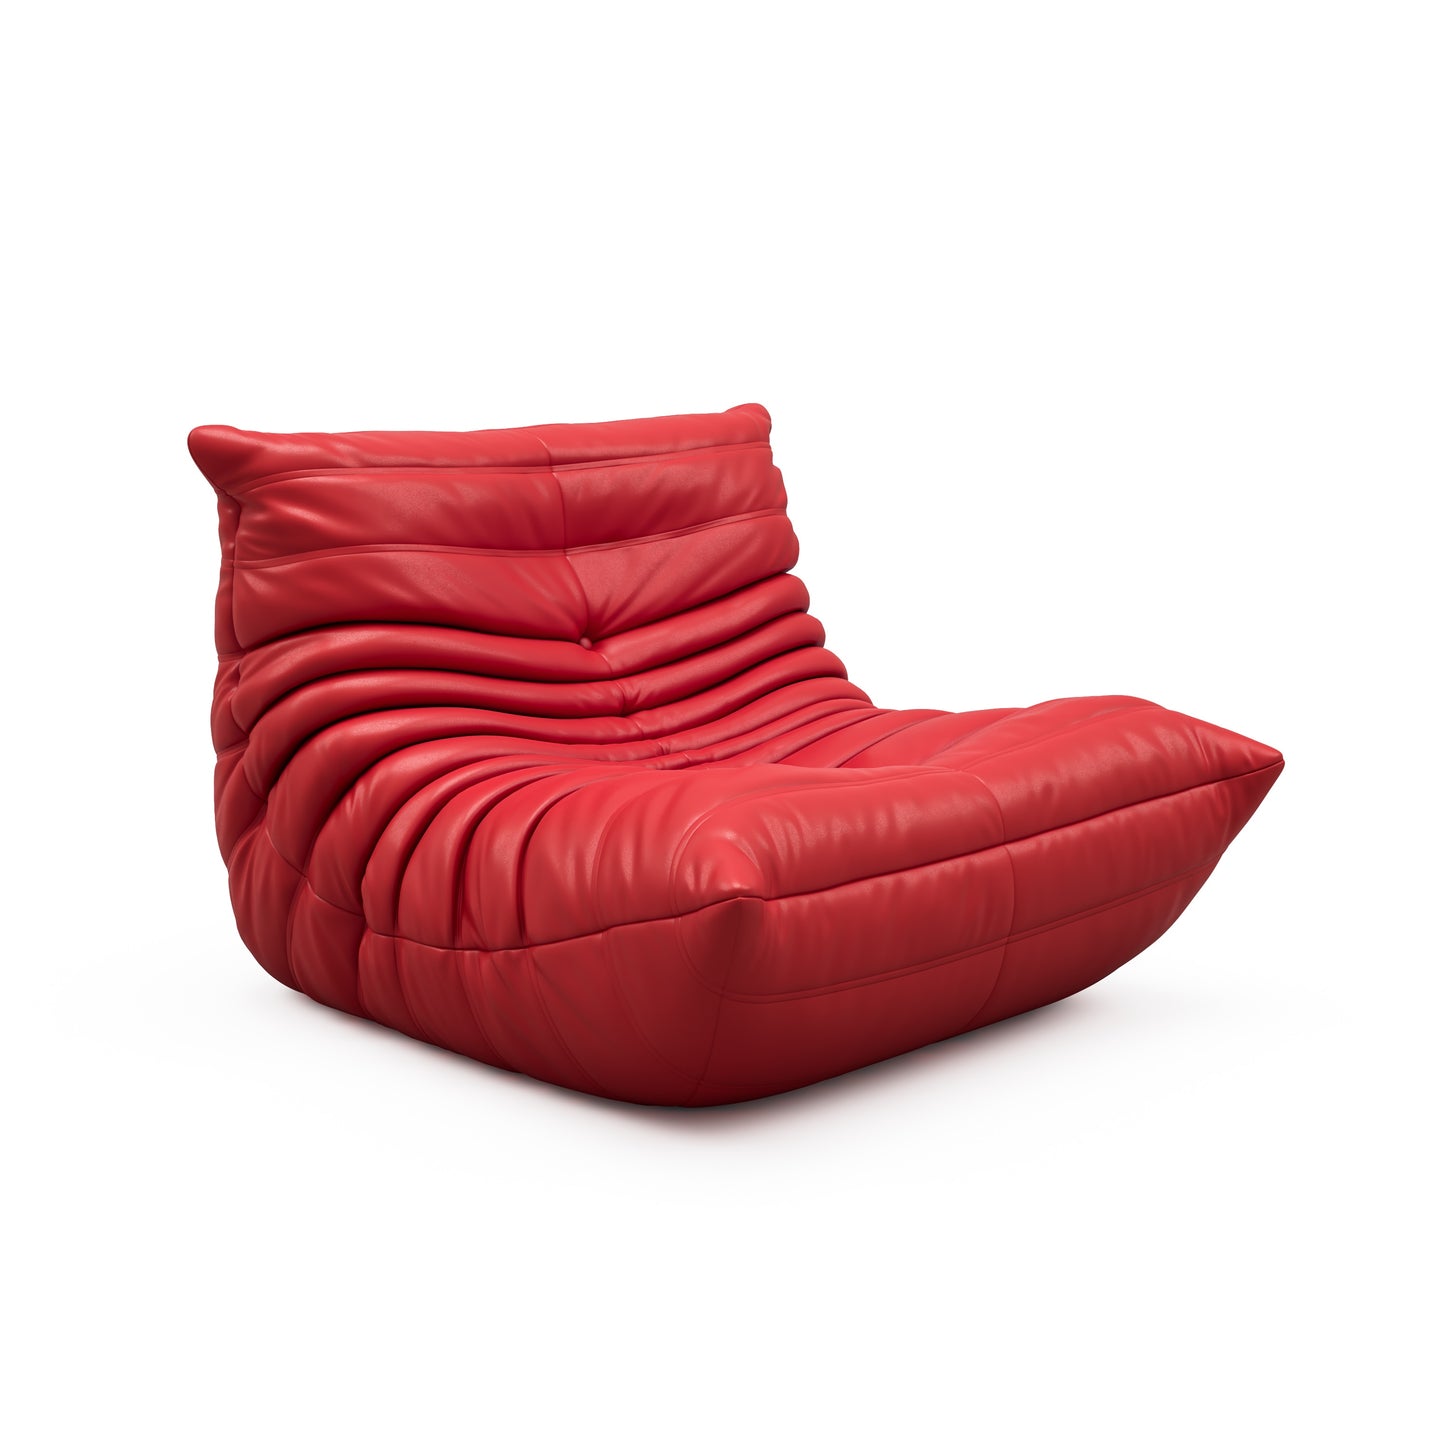 Furgle Fireside Chair Soft Lounge Chair Lazy Floor Sofa Accent Bean Bag Couch for Living Room Corner Chair Bedroom Office